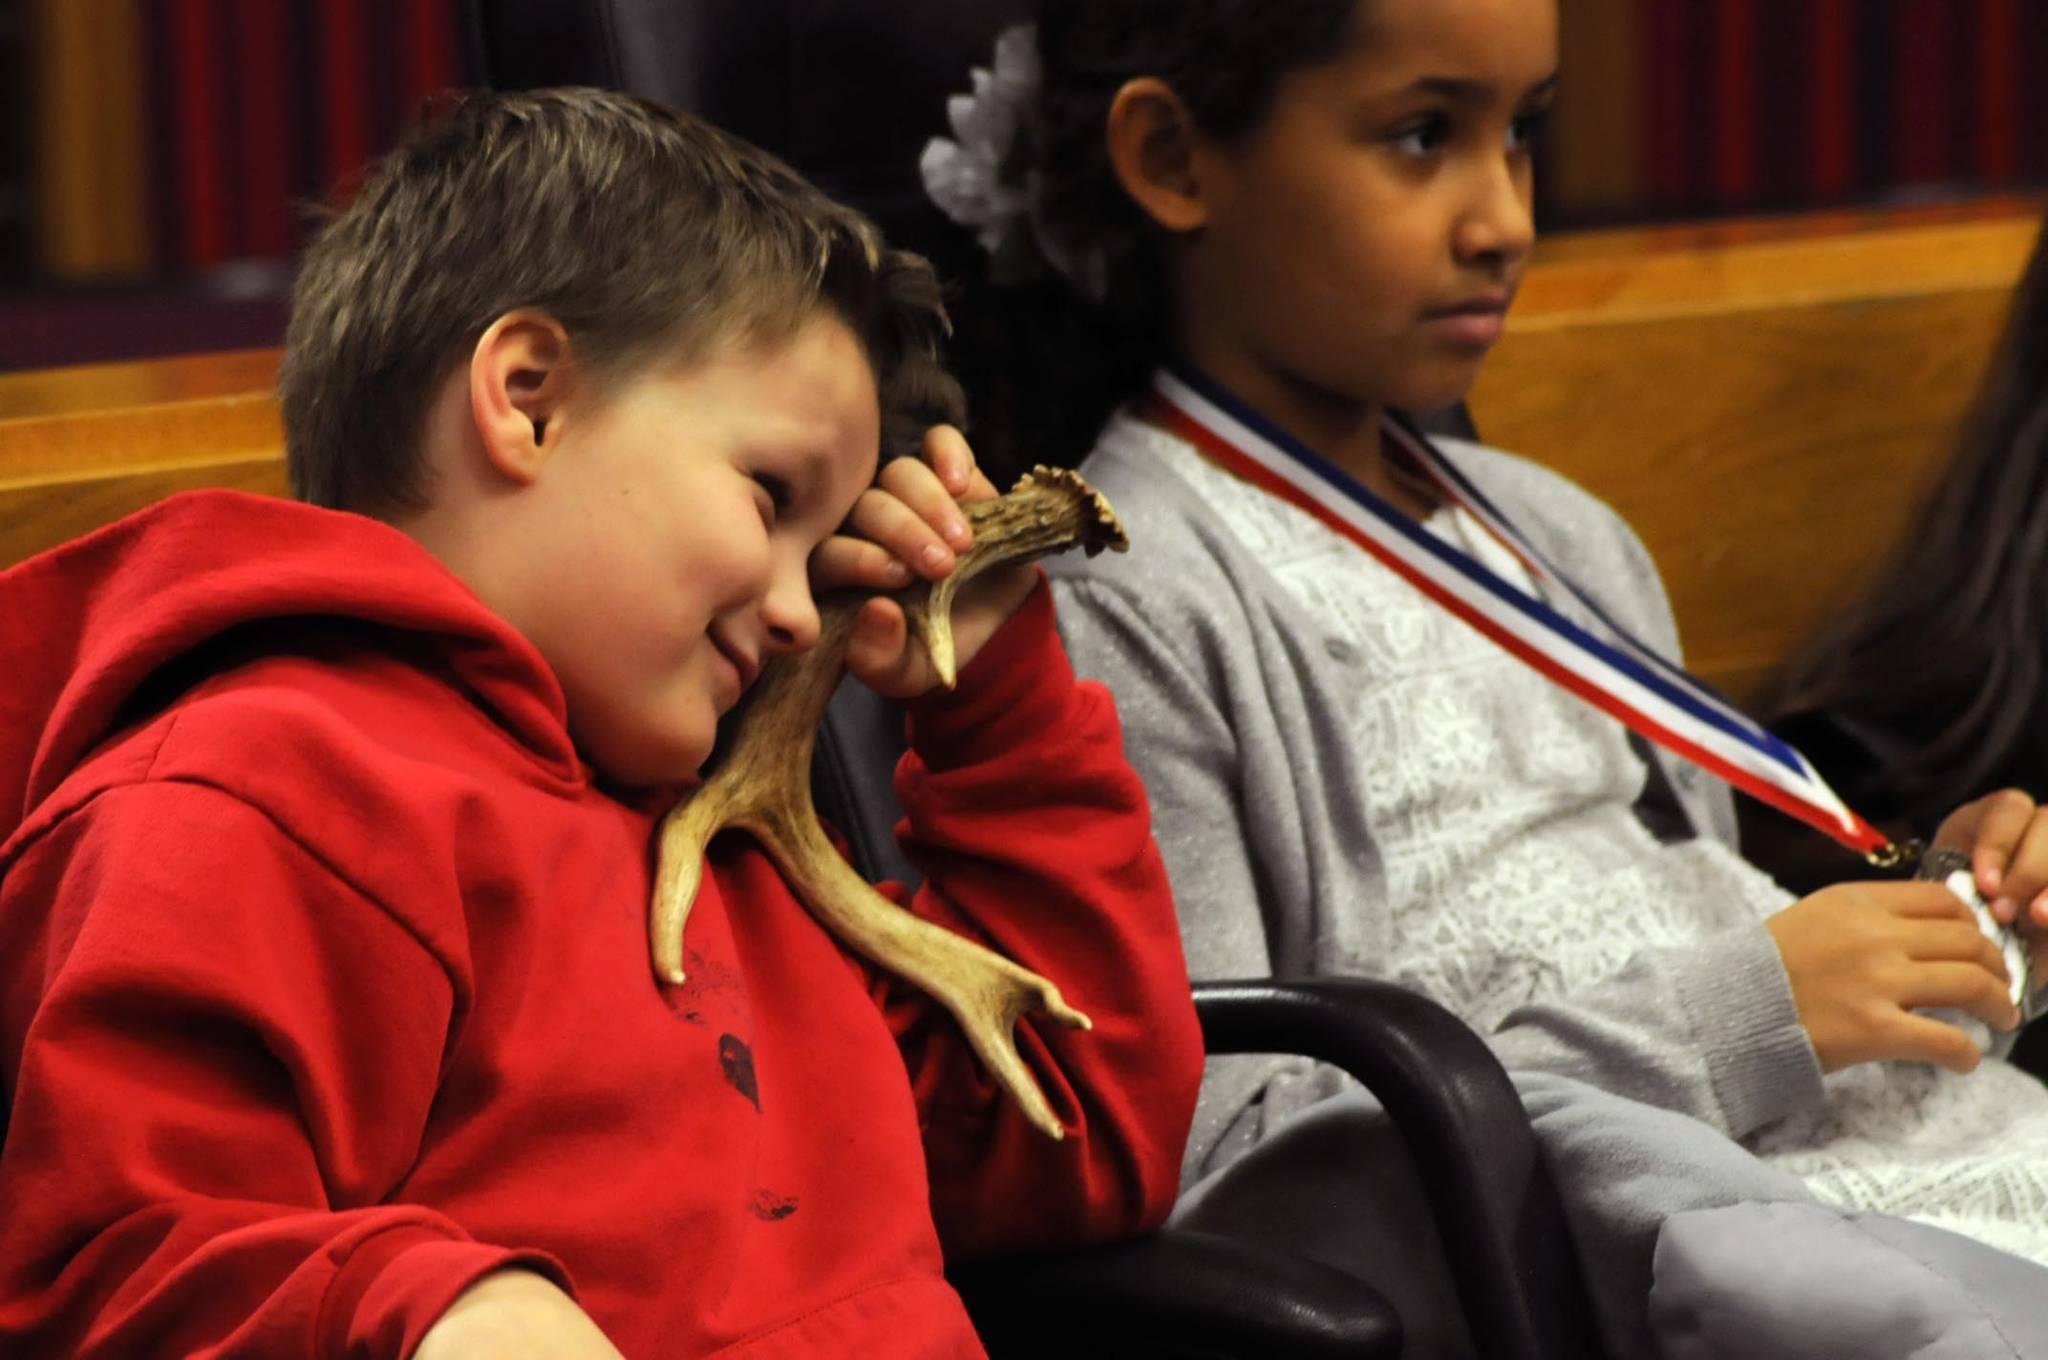 James Hartness, a second grader at Kalifornsky Beach Elementary School, playing the character of “Max,” listens during a witness’s testimony during the class’s mock trial of “Arthur T. Grinch,” based on Dr. Seuss’s classic “How the Grinch Stole Christmas” on Thursday, Nov. 9, 2017 in Kenai, Alaska. The class has been studying civics and learning about the court process and put on a mock sentencing hearing, complete with witnesses and a jury composed of students’ parents and K-Beach Elementary Principal Nate Crabtree. (Photo by Elizabeth Earl/Peninsula Clarion)